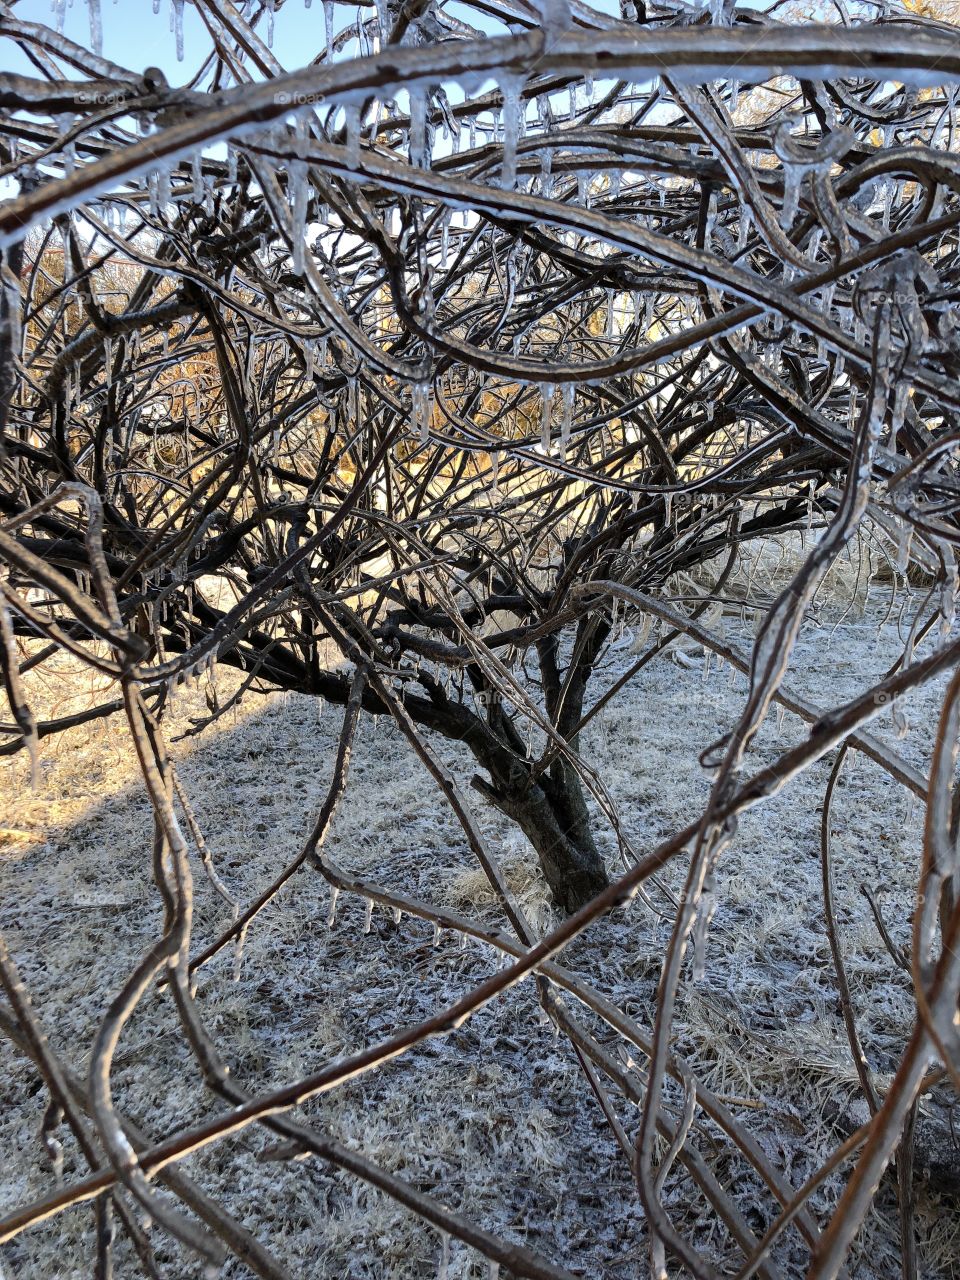 Feeling tangled in the branches of this frozen tree as they reach all around me. 